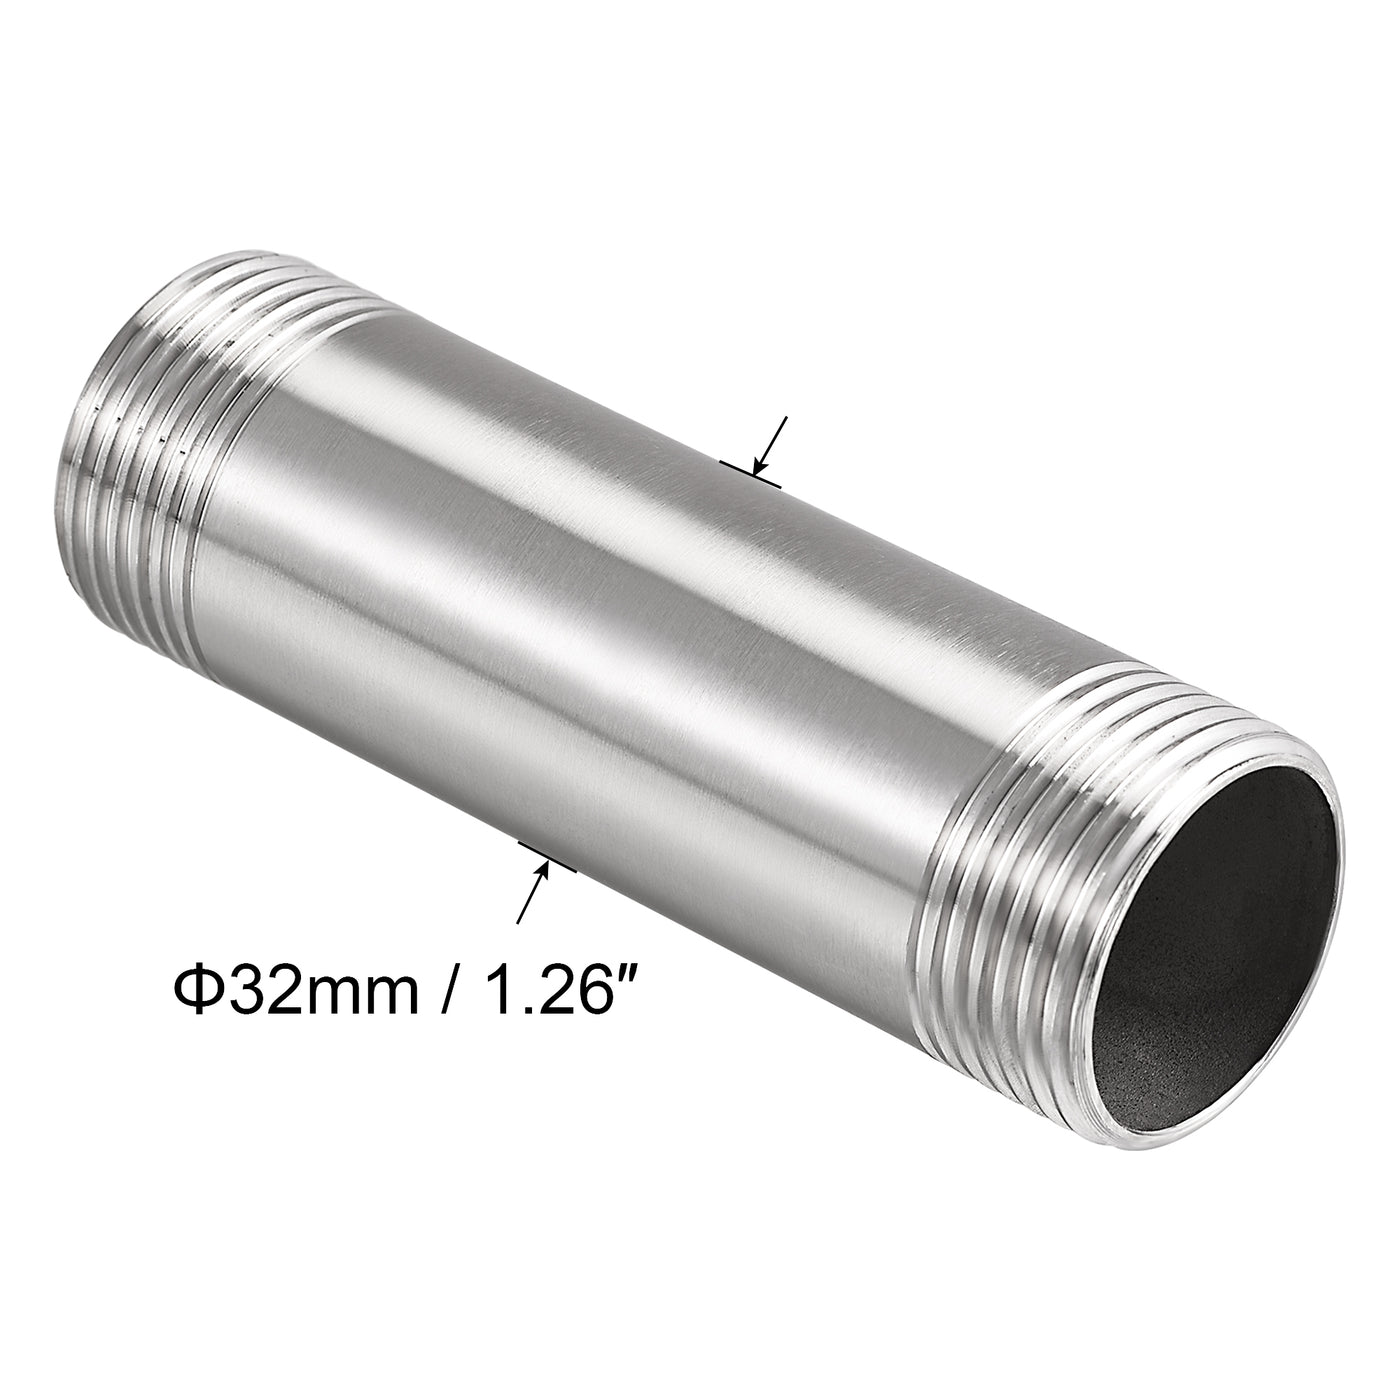 Uxcell Uxcell 304 Stainless Steel Pipe Fitting G1 Male Thread 50mm Length Coupler for Extending Pipes